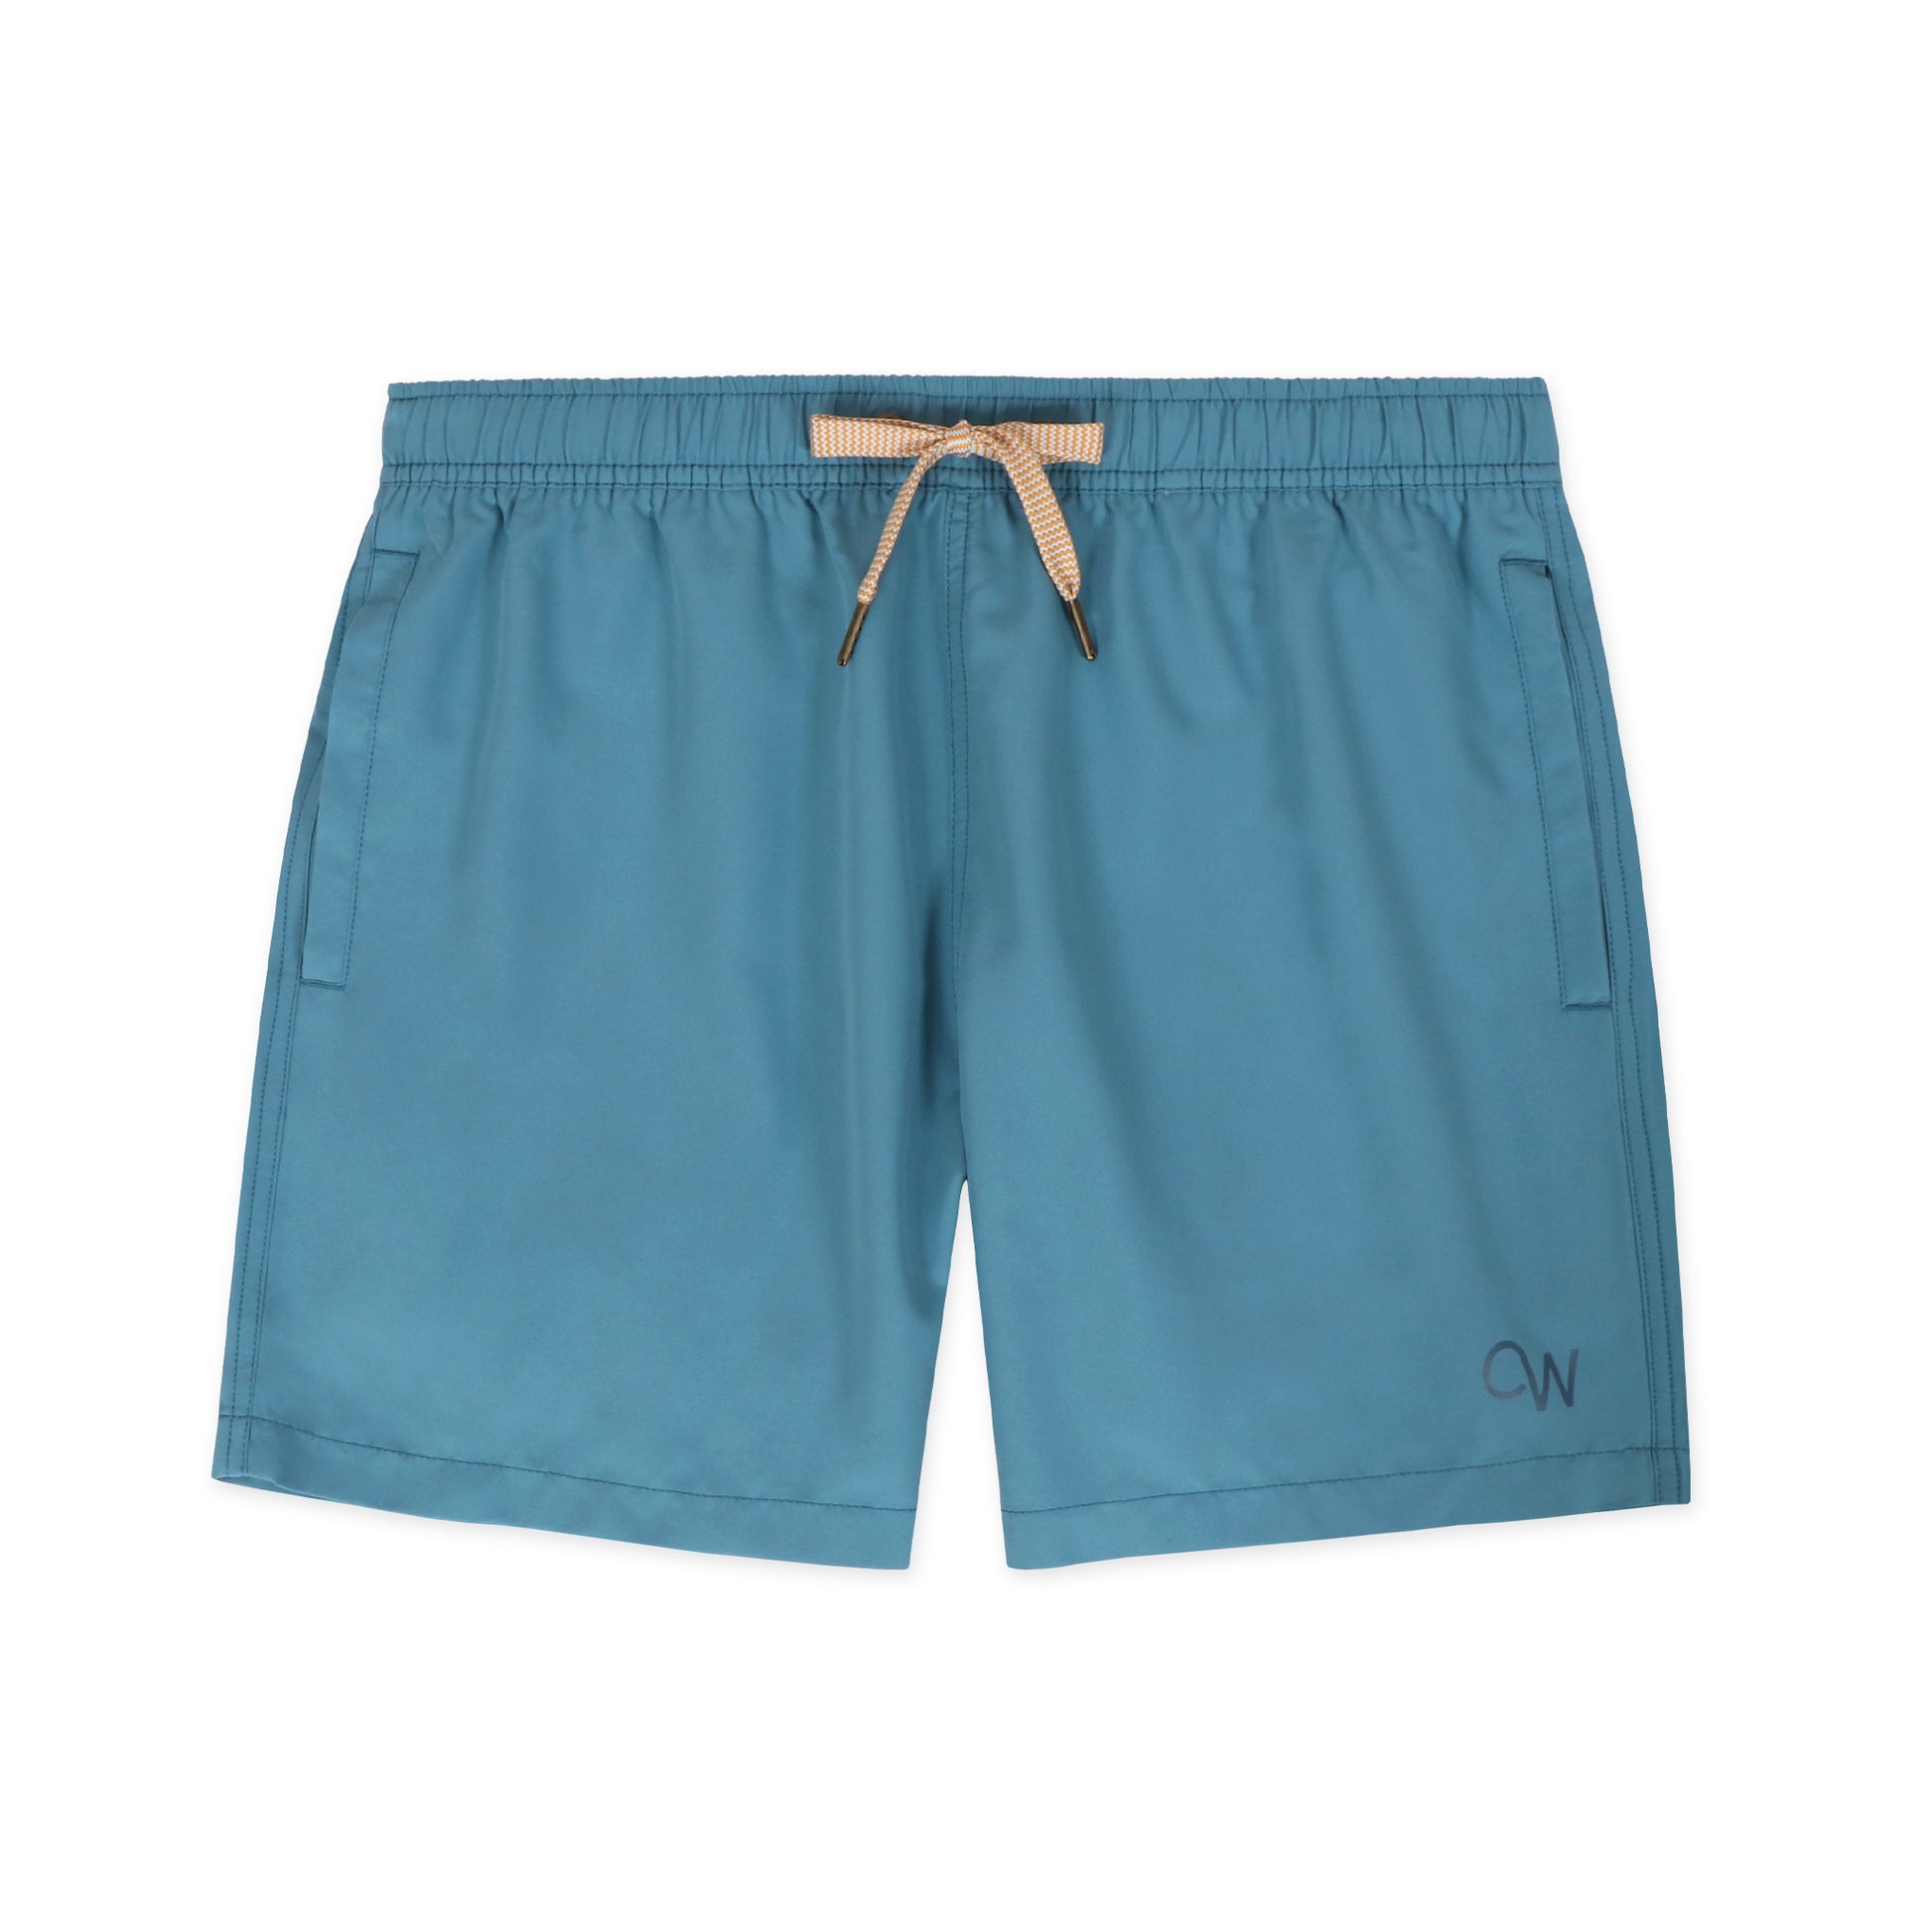 Original Weekend Blue Steel Solid Colour Men's Sustainable Swim Shorts Flat Lay